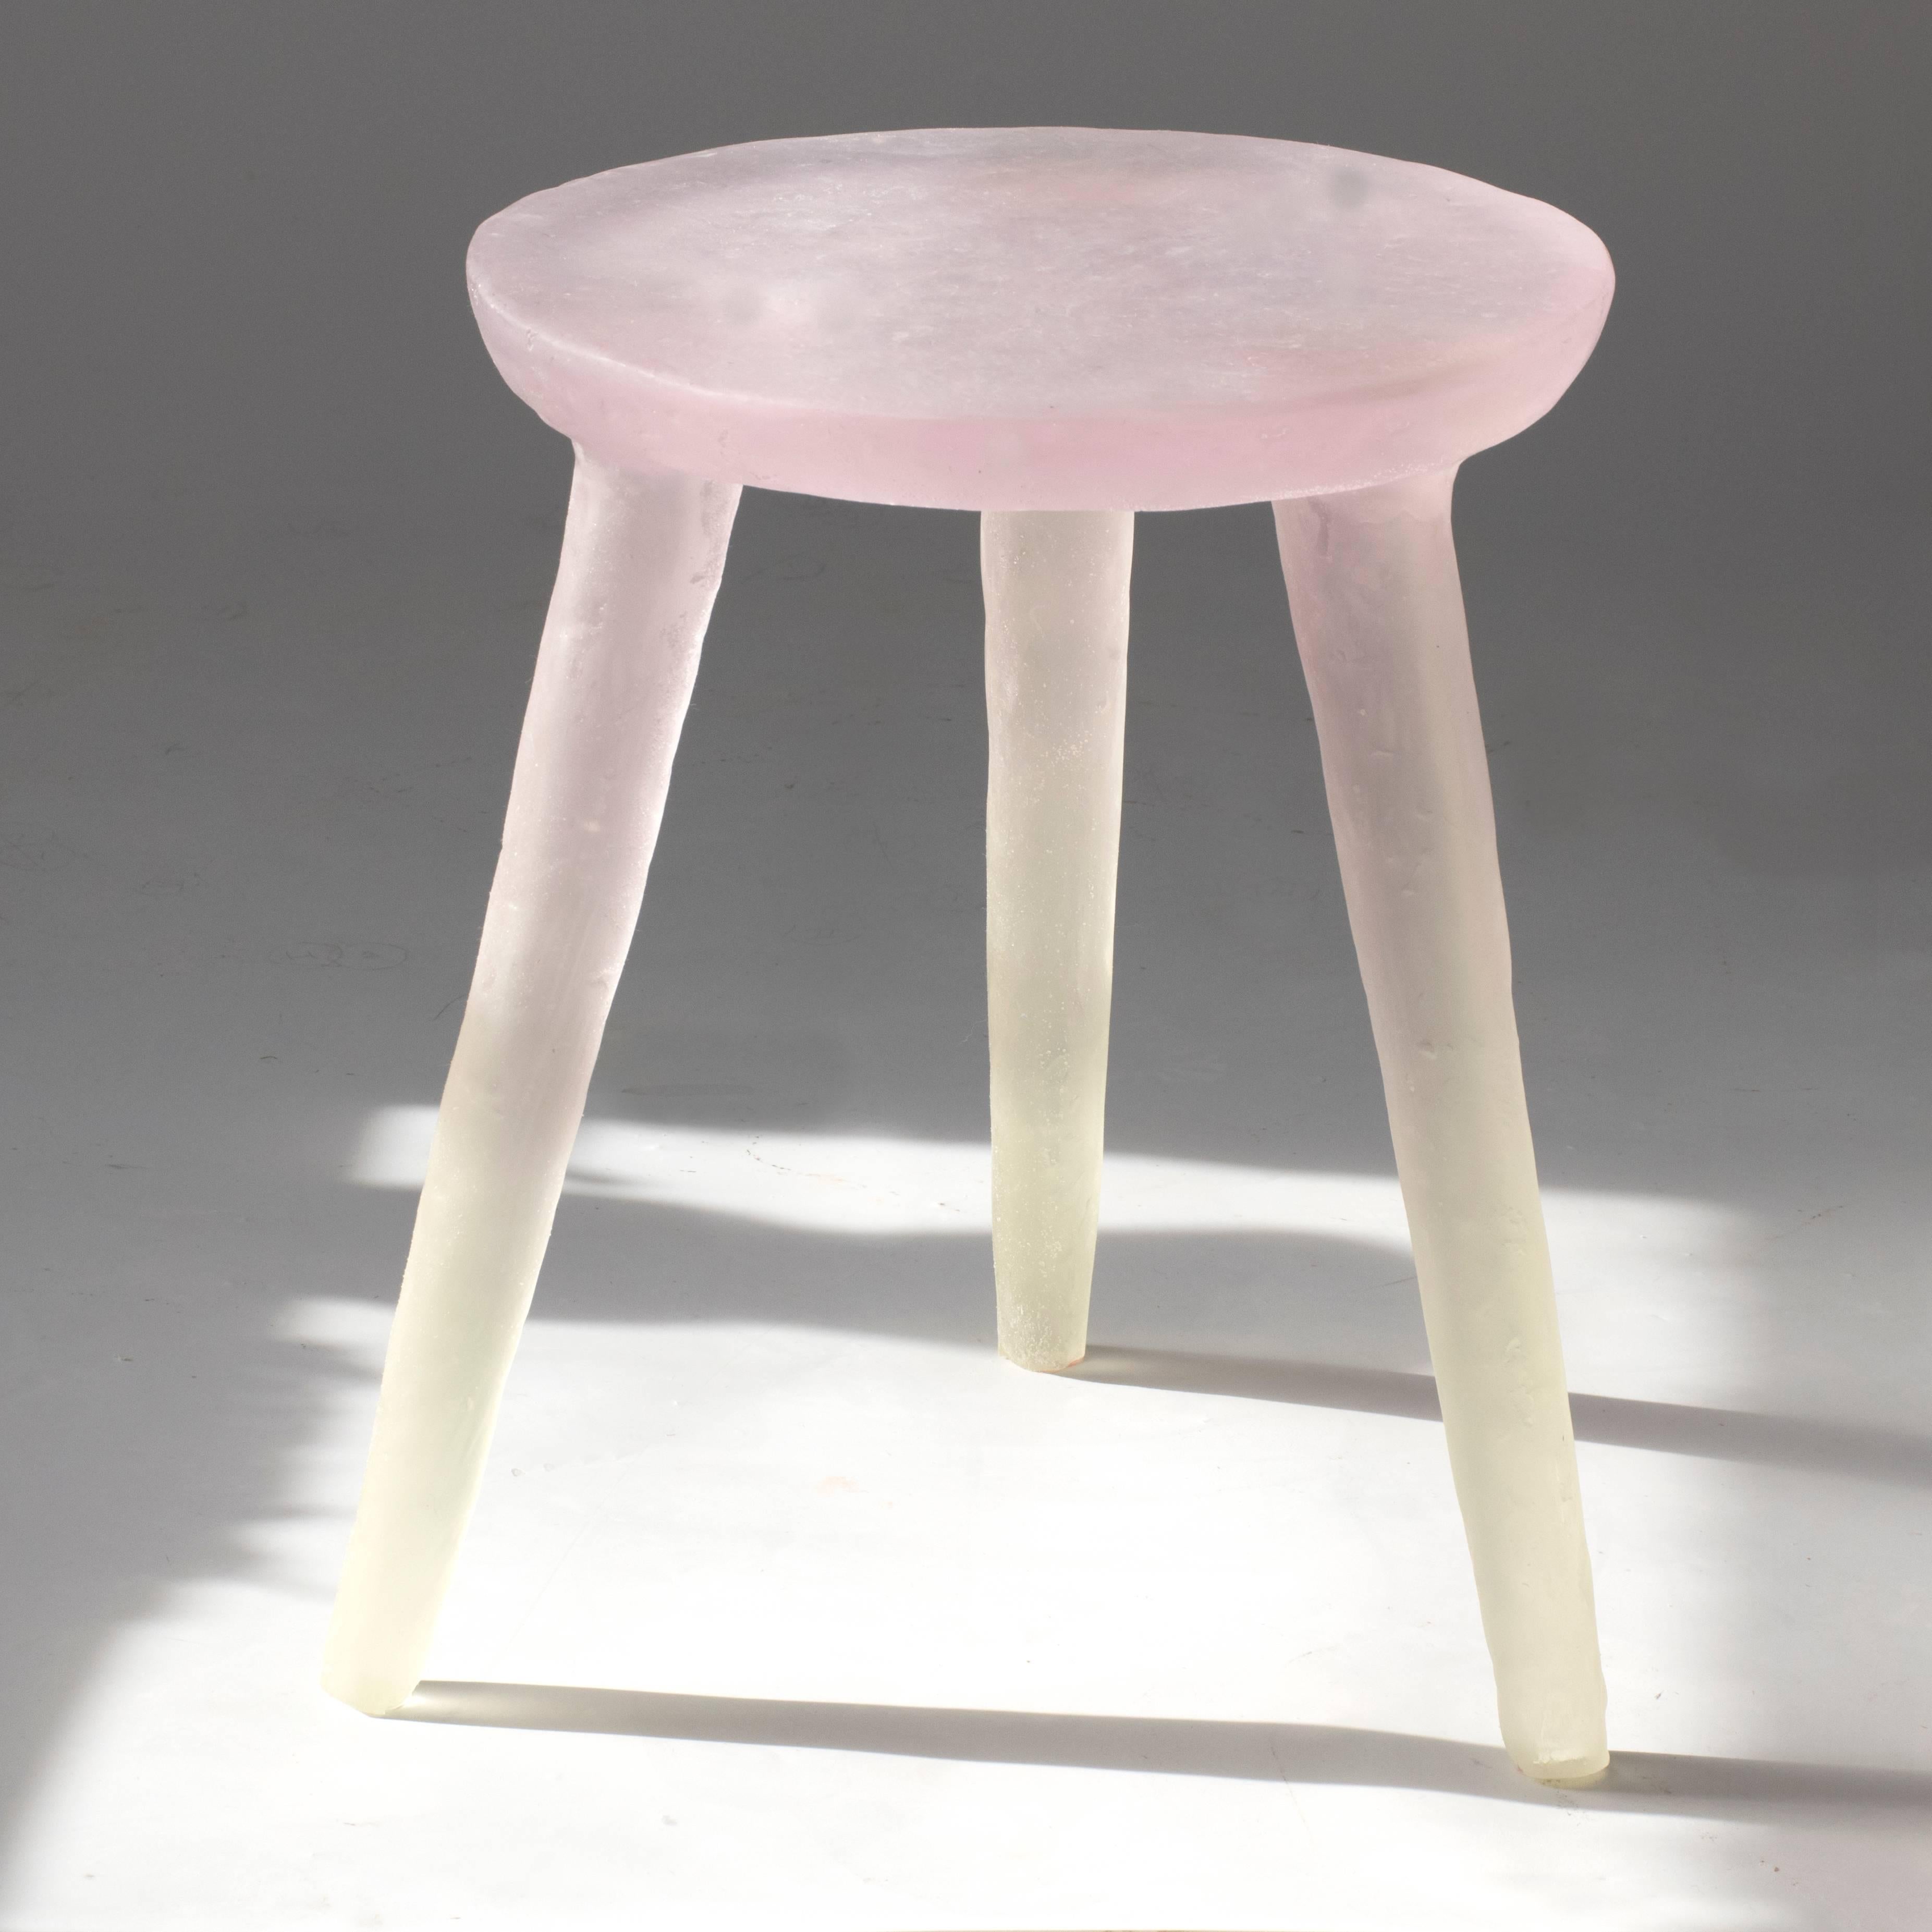 American Glow Side Table or Stool in Pink to Yellow, Handmade from Recycled Resin For Sale